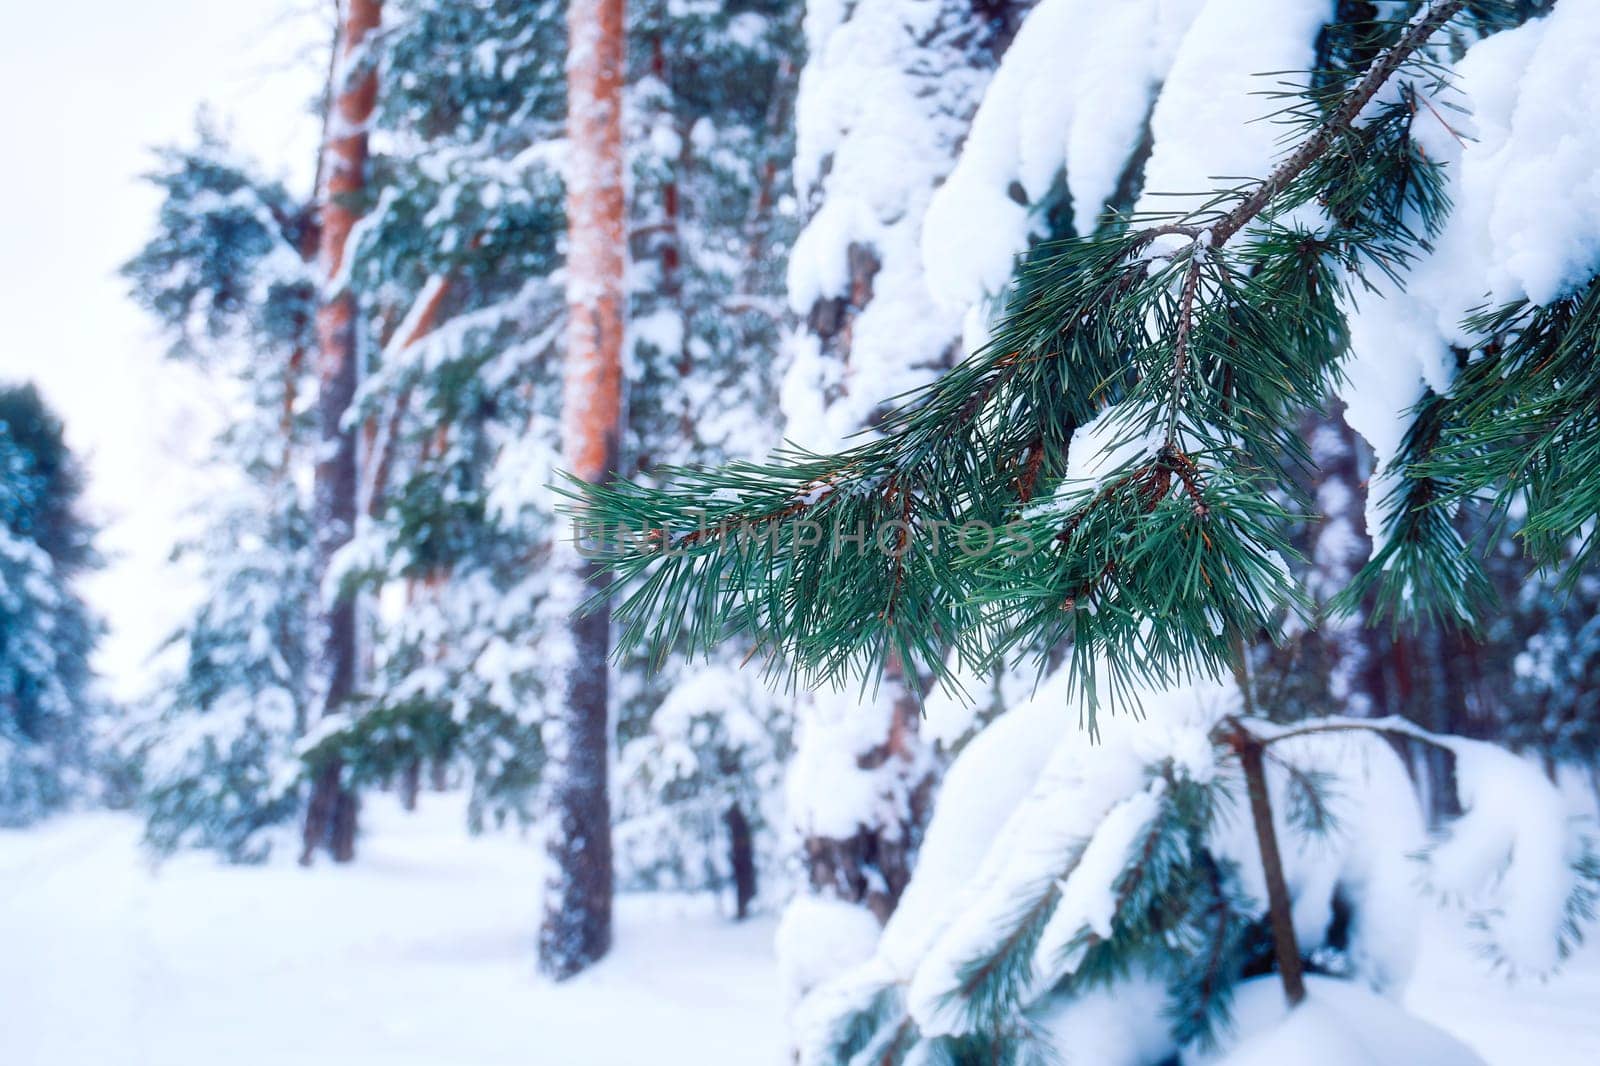 Pine branches covered with snow in the winter forest. Christmas background. Soft filter added by DAndreev